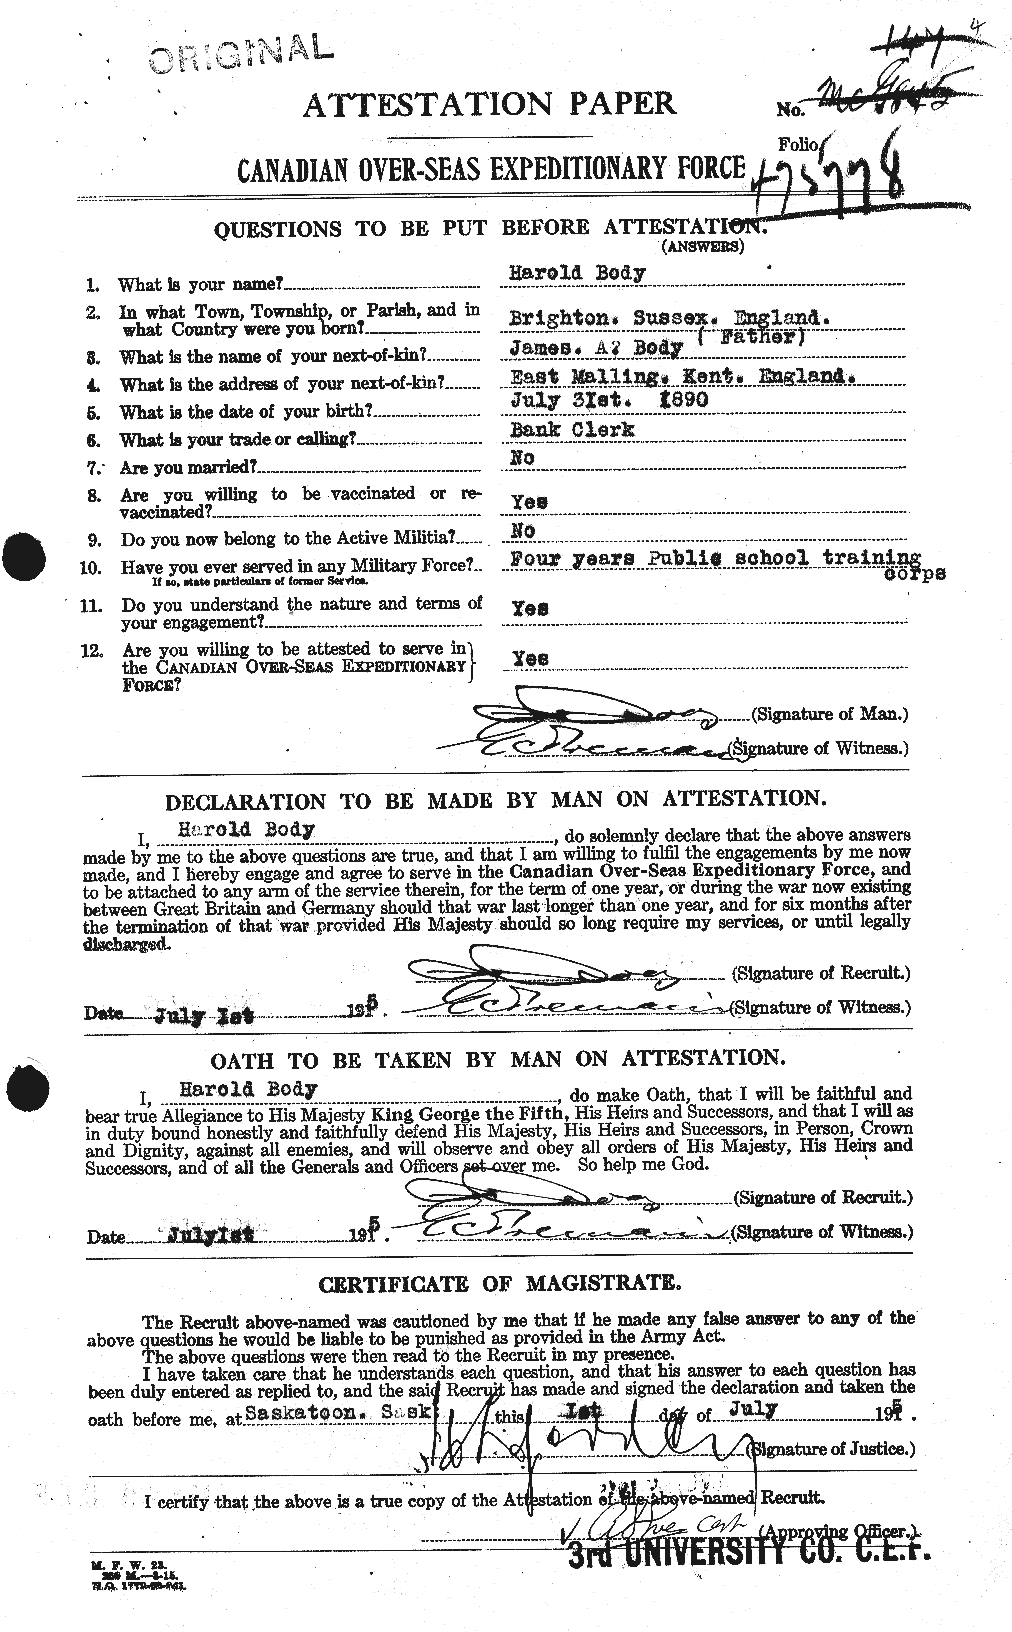 Personnel Records of the First World War - CEF 245101a